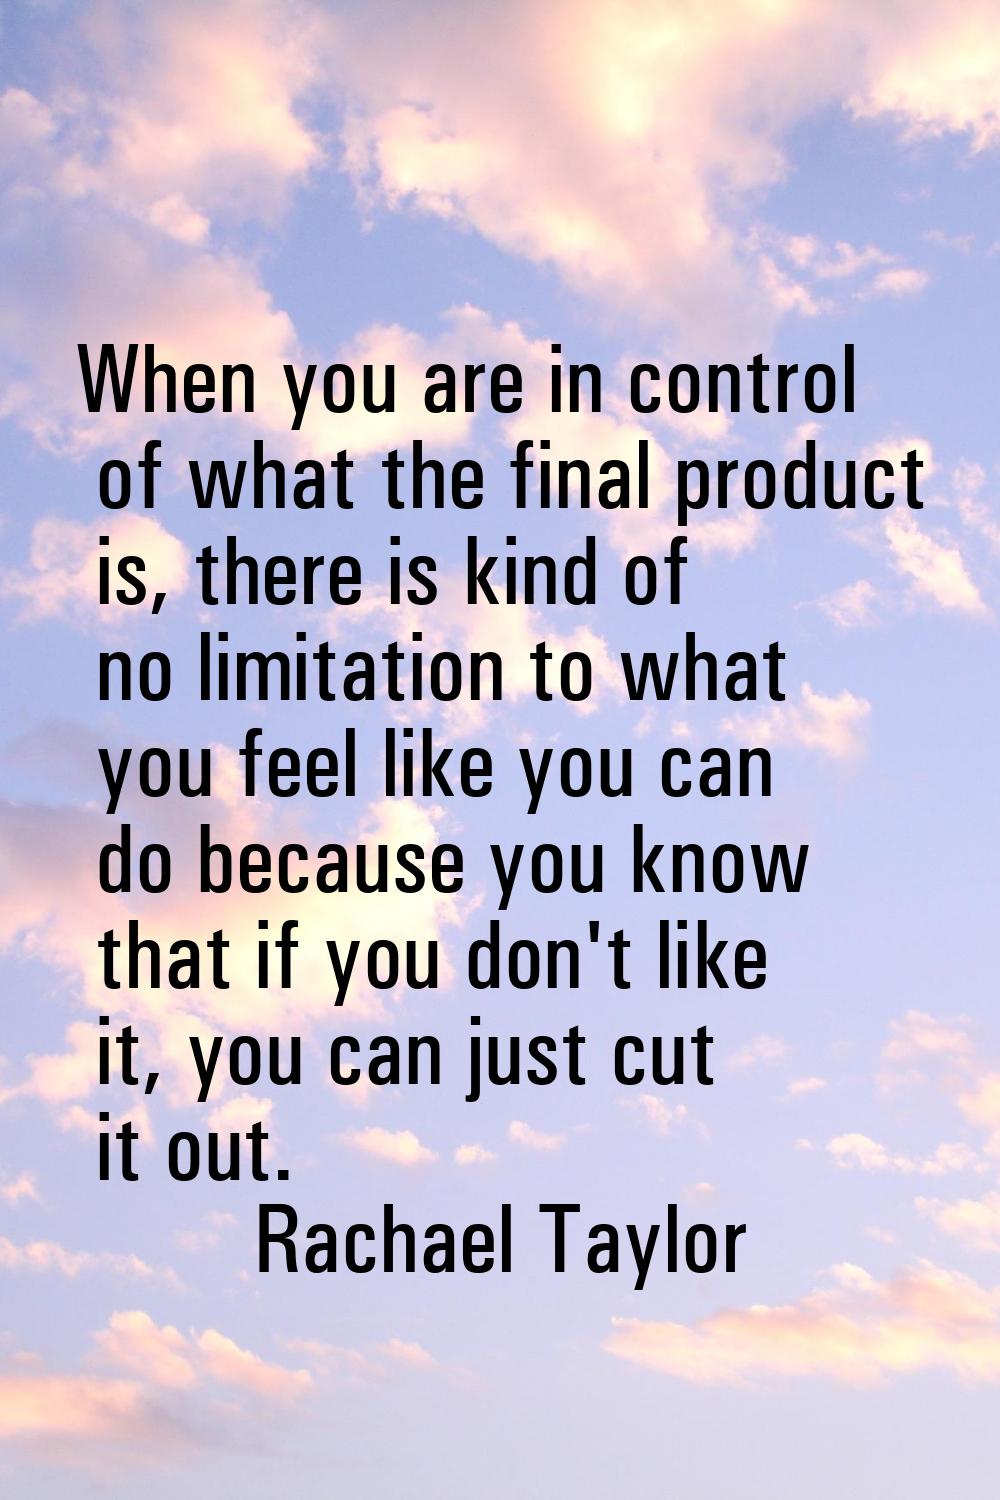 When you are in control of what the final product is, there is kind of no limitation to what you fe